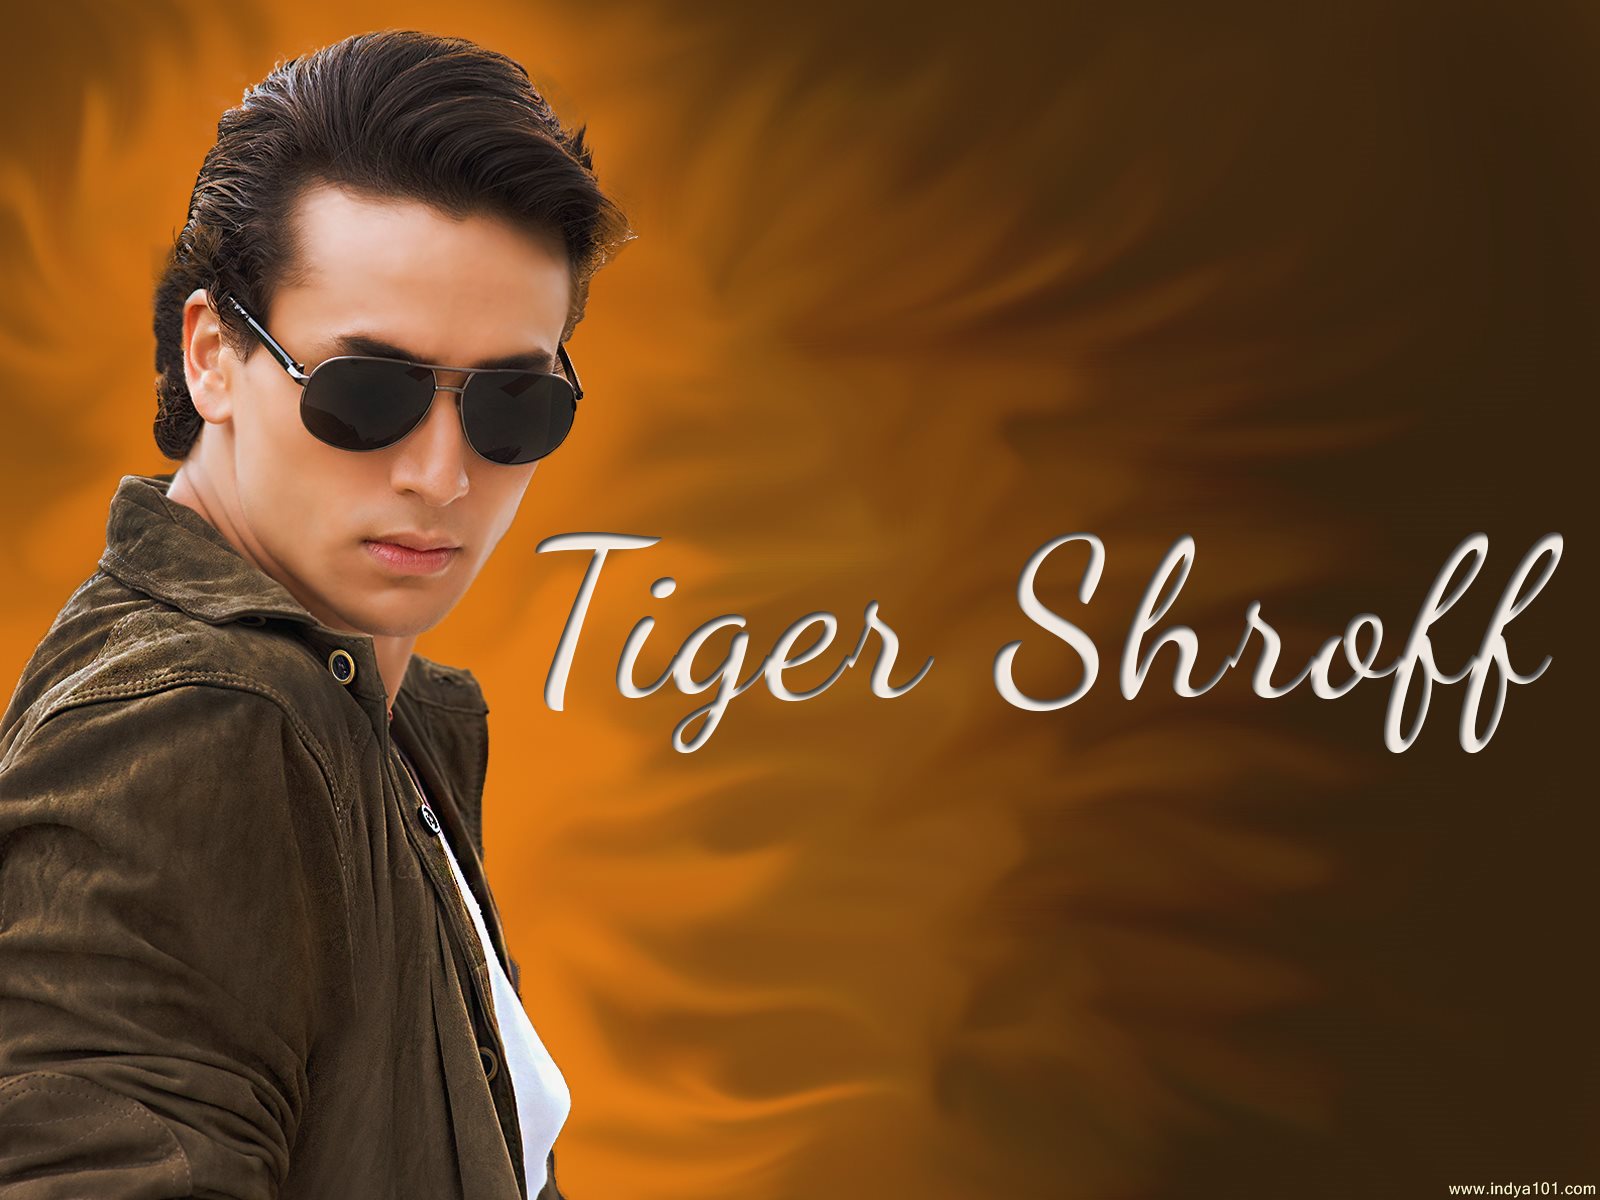 Tiger Shroff Body Shapes With Face Closeup Hd Wallpaper - Tiger Shroff , HD Wallpaper & Backgrounds